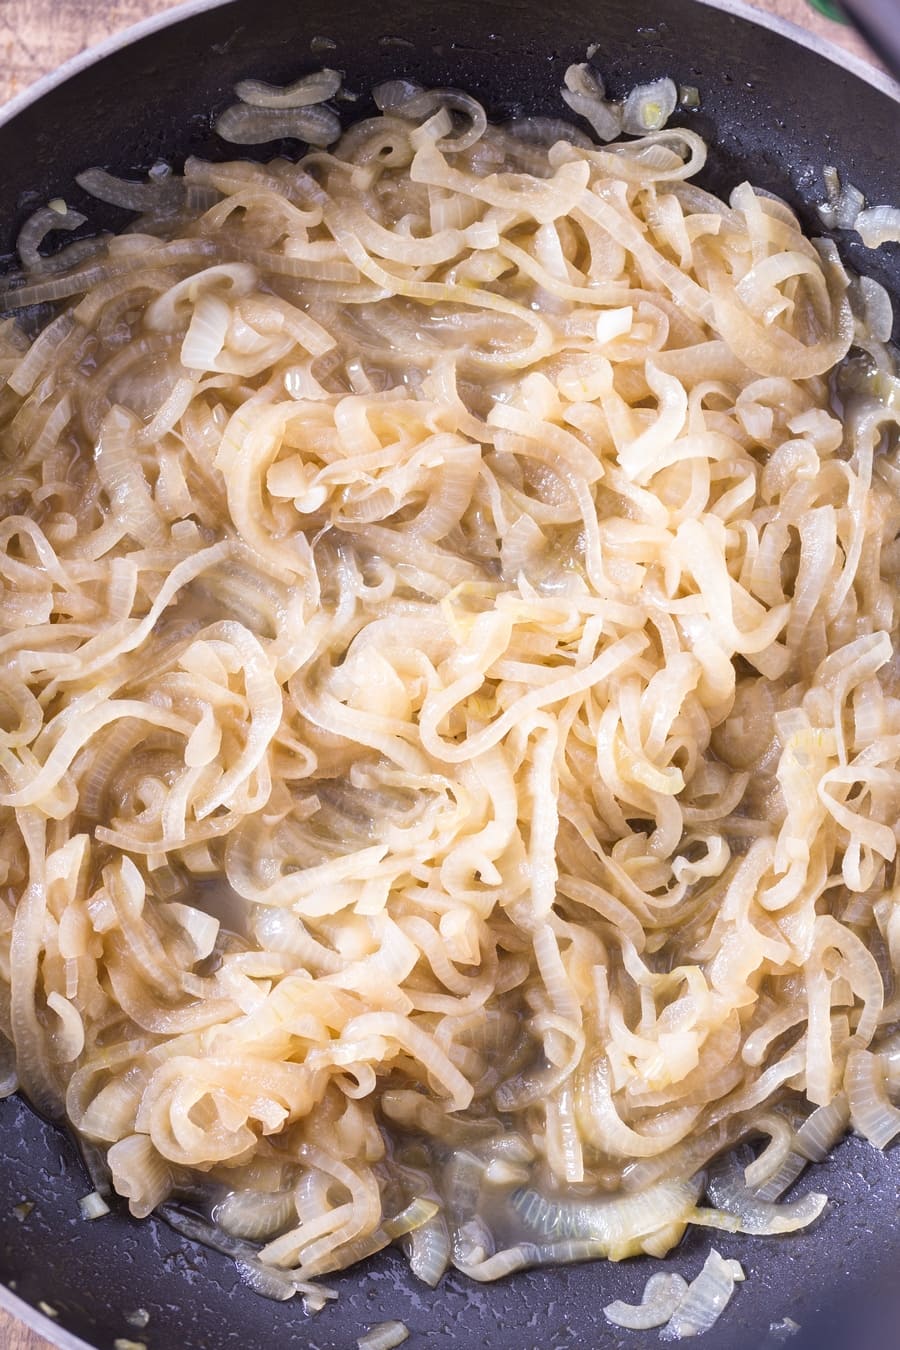 Cooked slices of onion in a skillet.